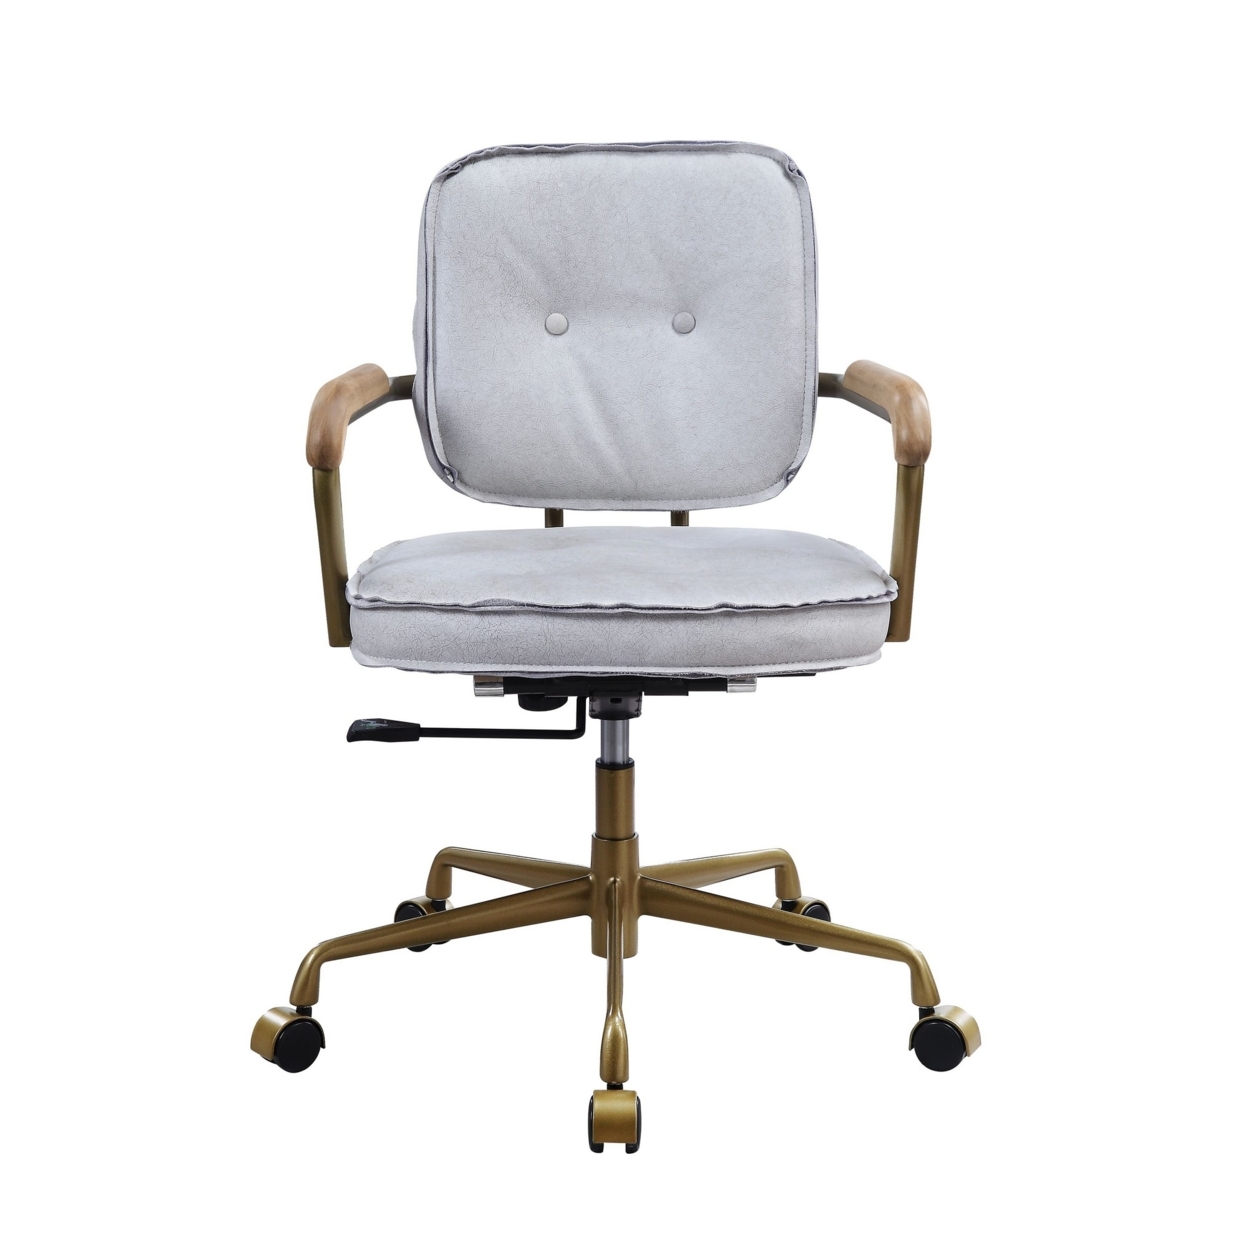 Office Chair With Faux Leather Upholstery, Vintage White And Brown- Saltoro Sherpi